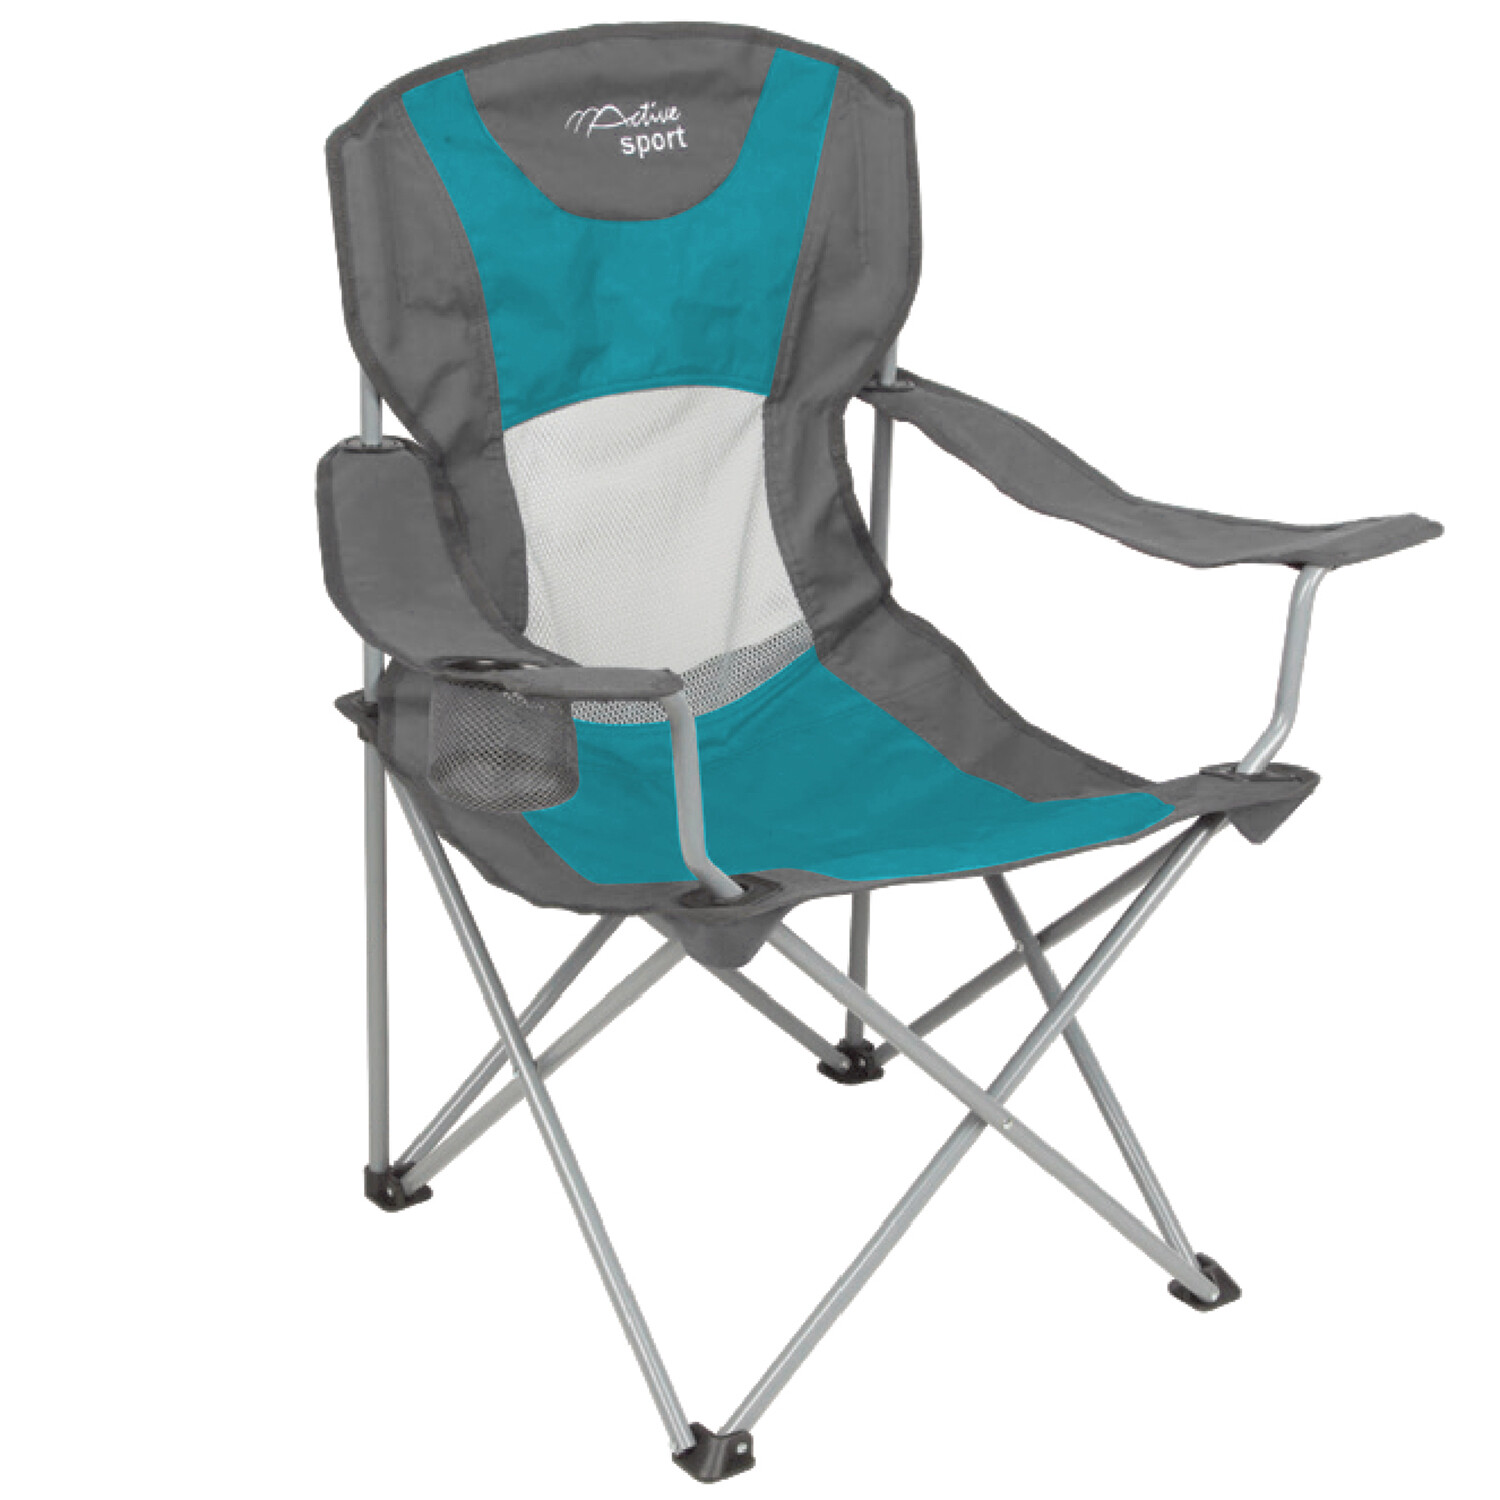 Active Sport Blue and Grey Deluxe Camping Chair Image